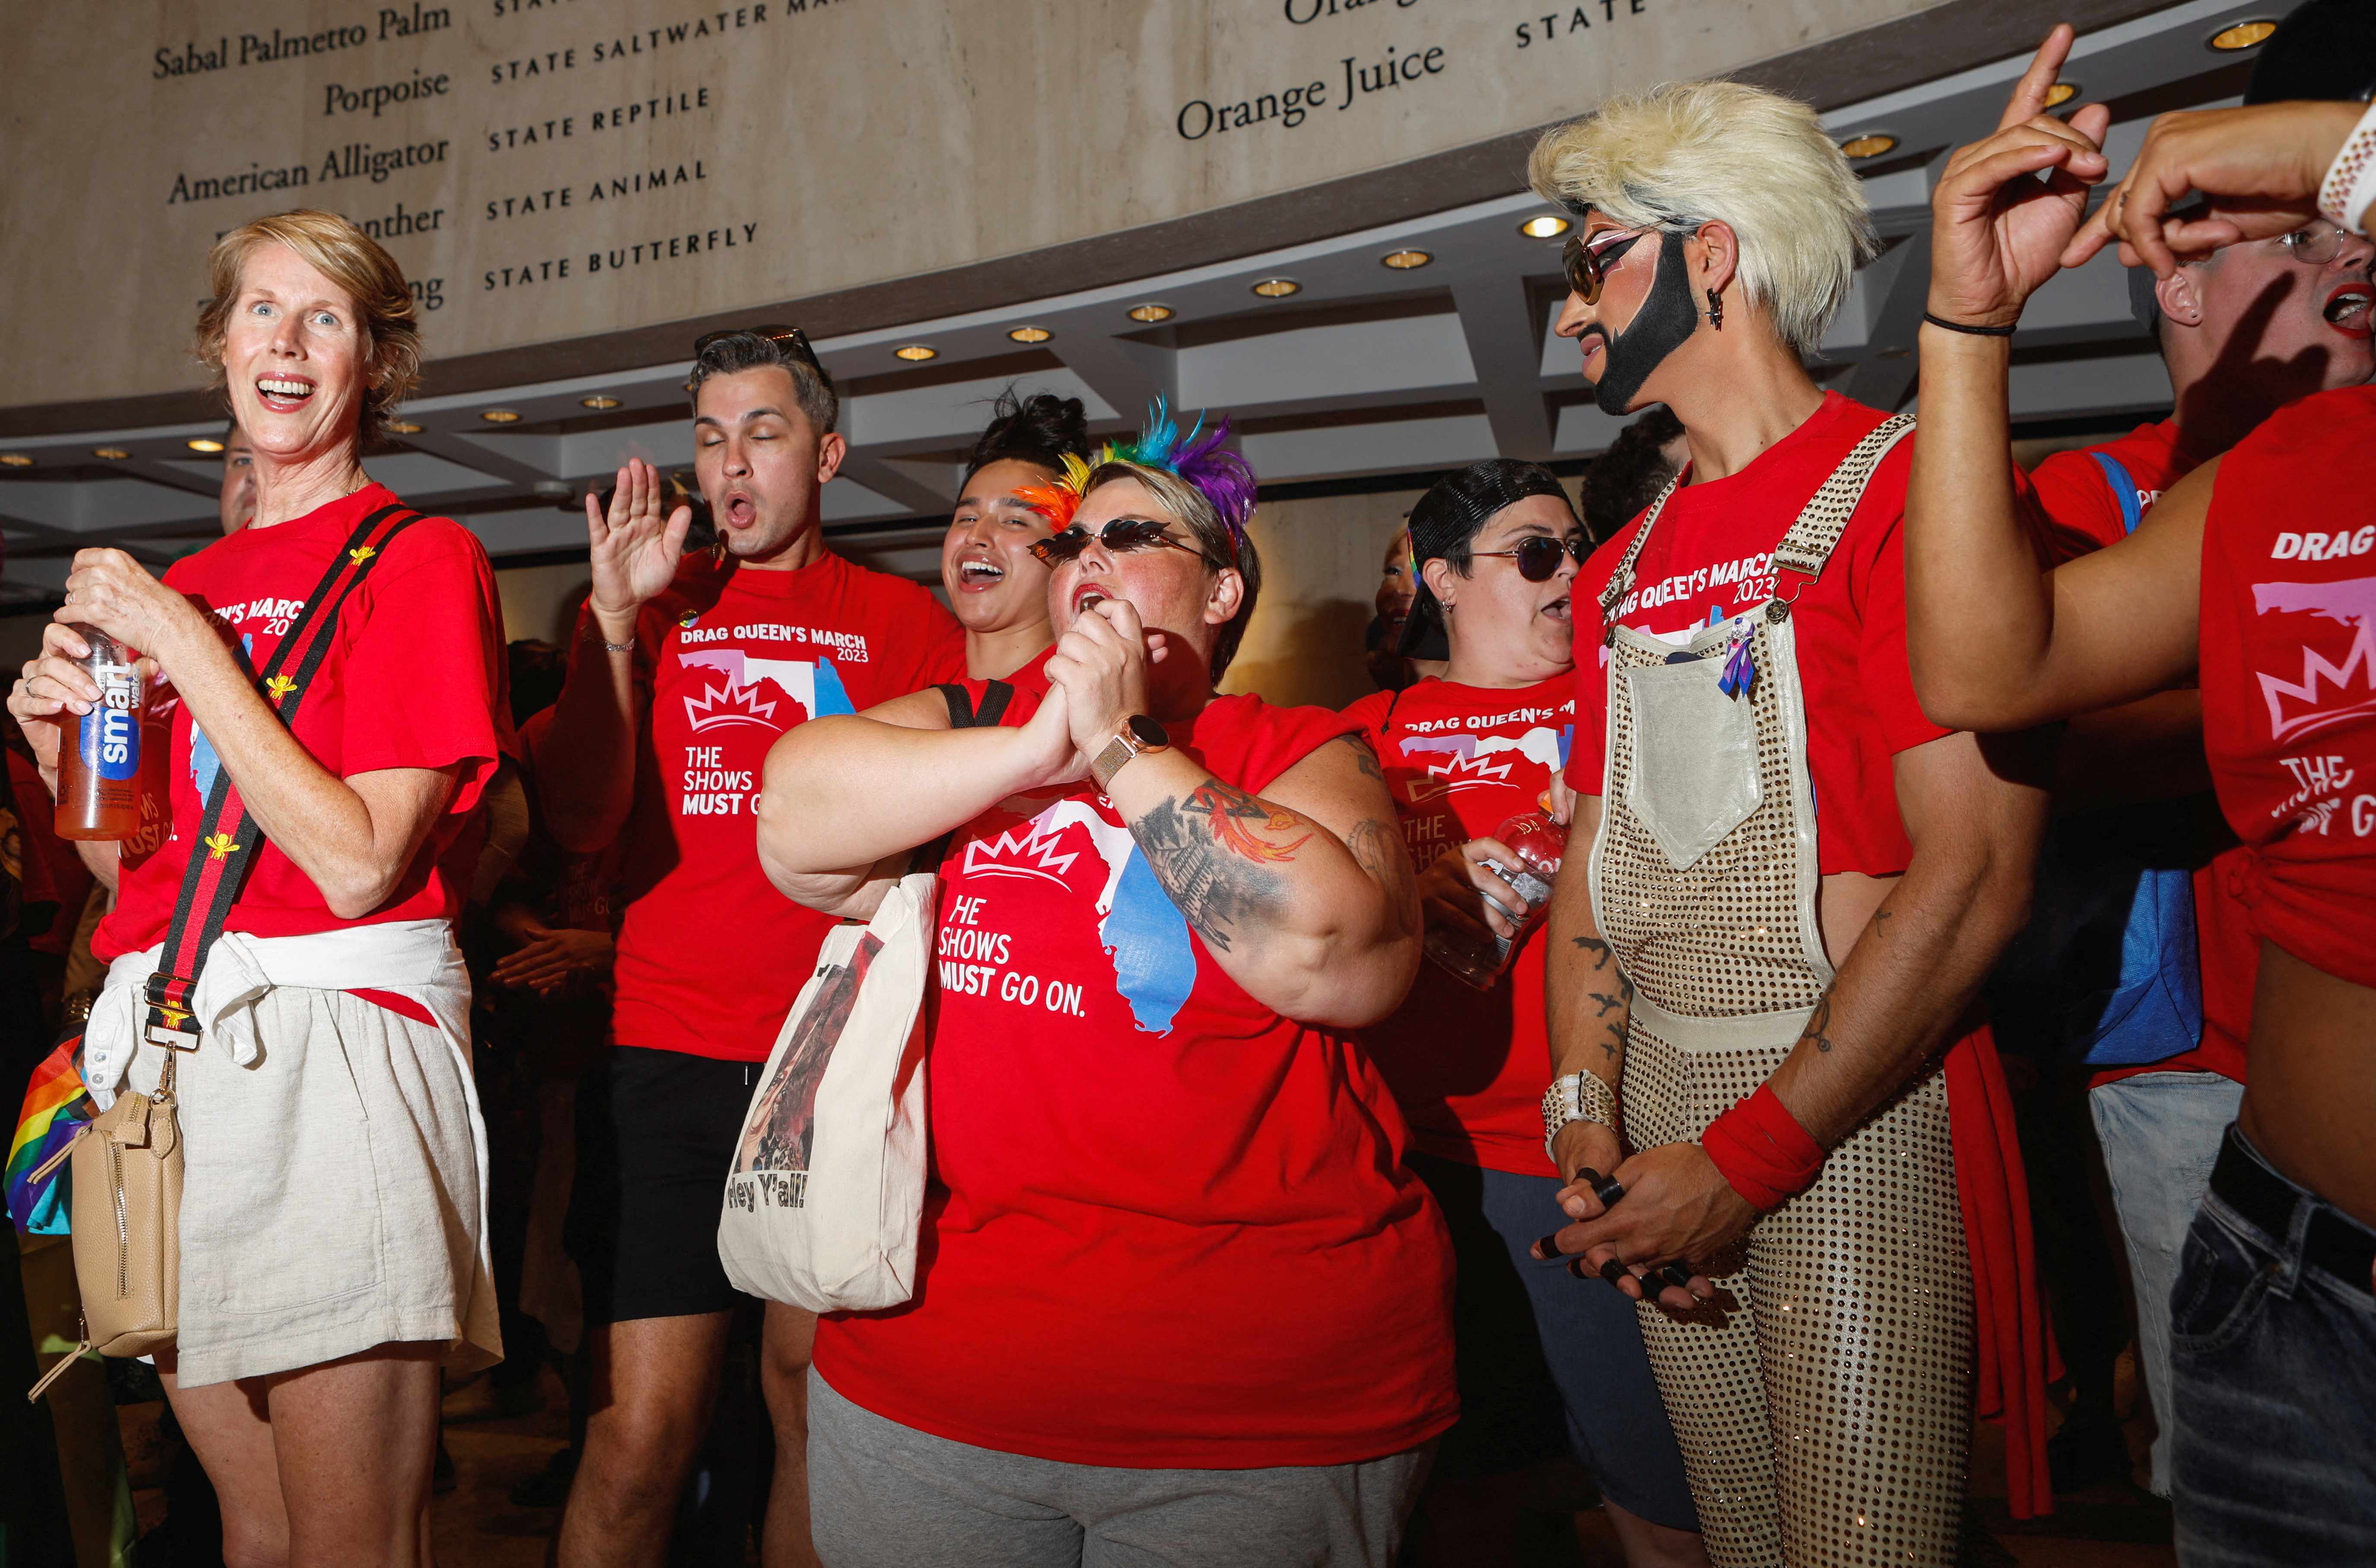 Supporters of the drag community protest against Florida's 'Protection of Children' bill which would ban children at live adult performances, at the state capitol in Tallahassee, Florida